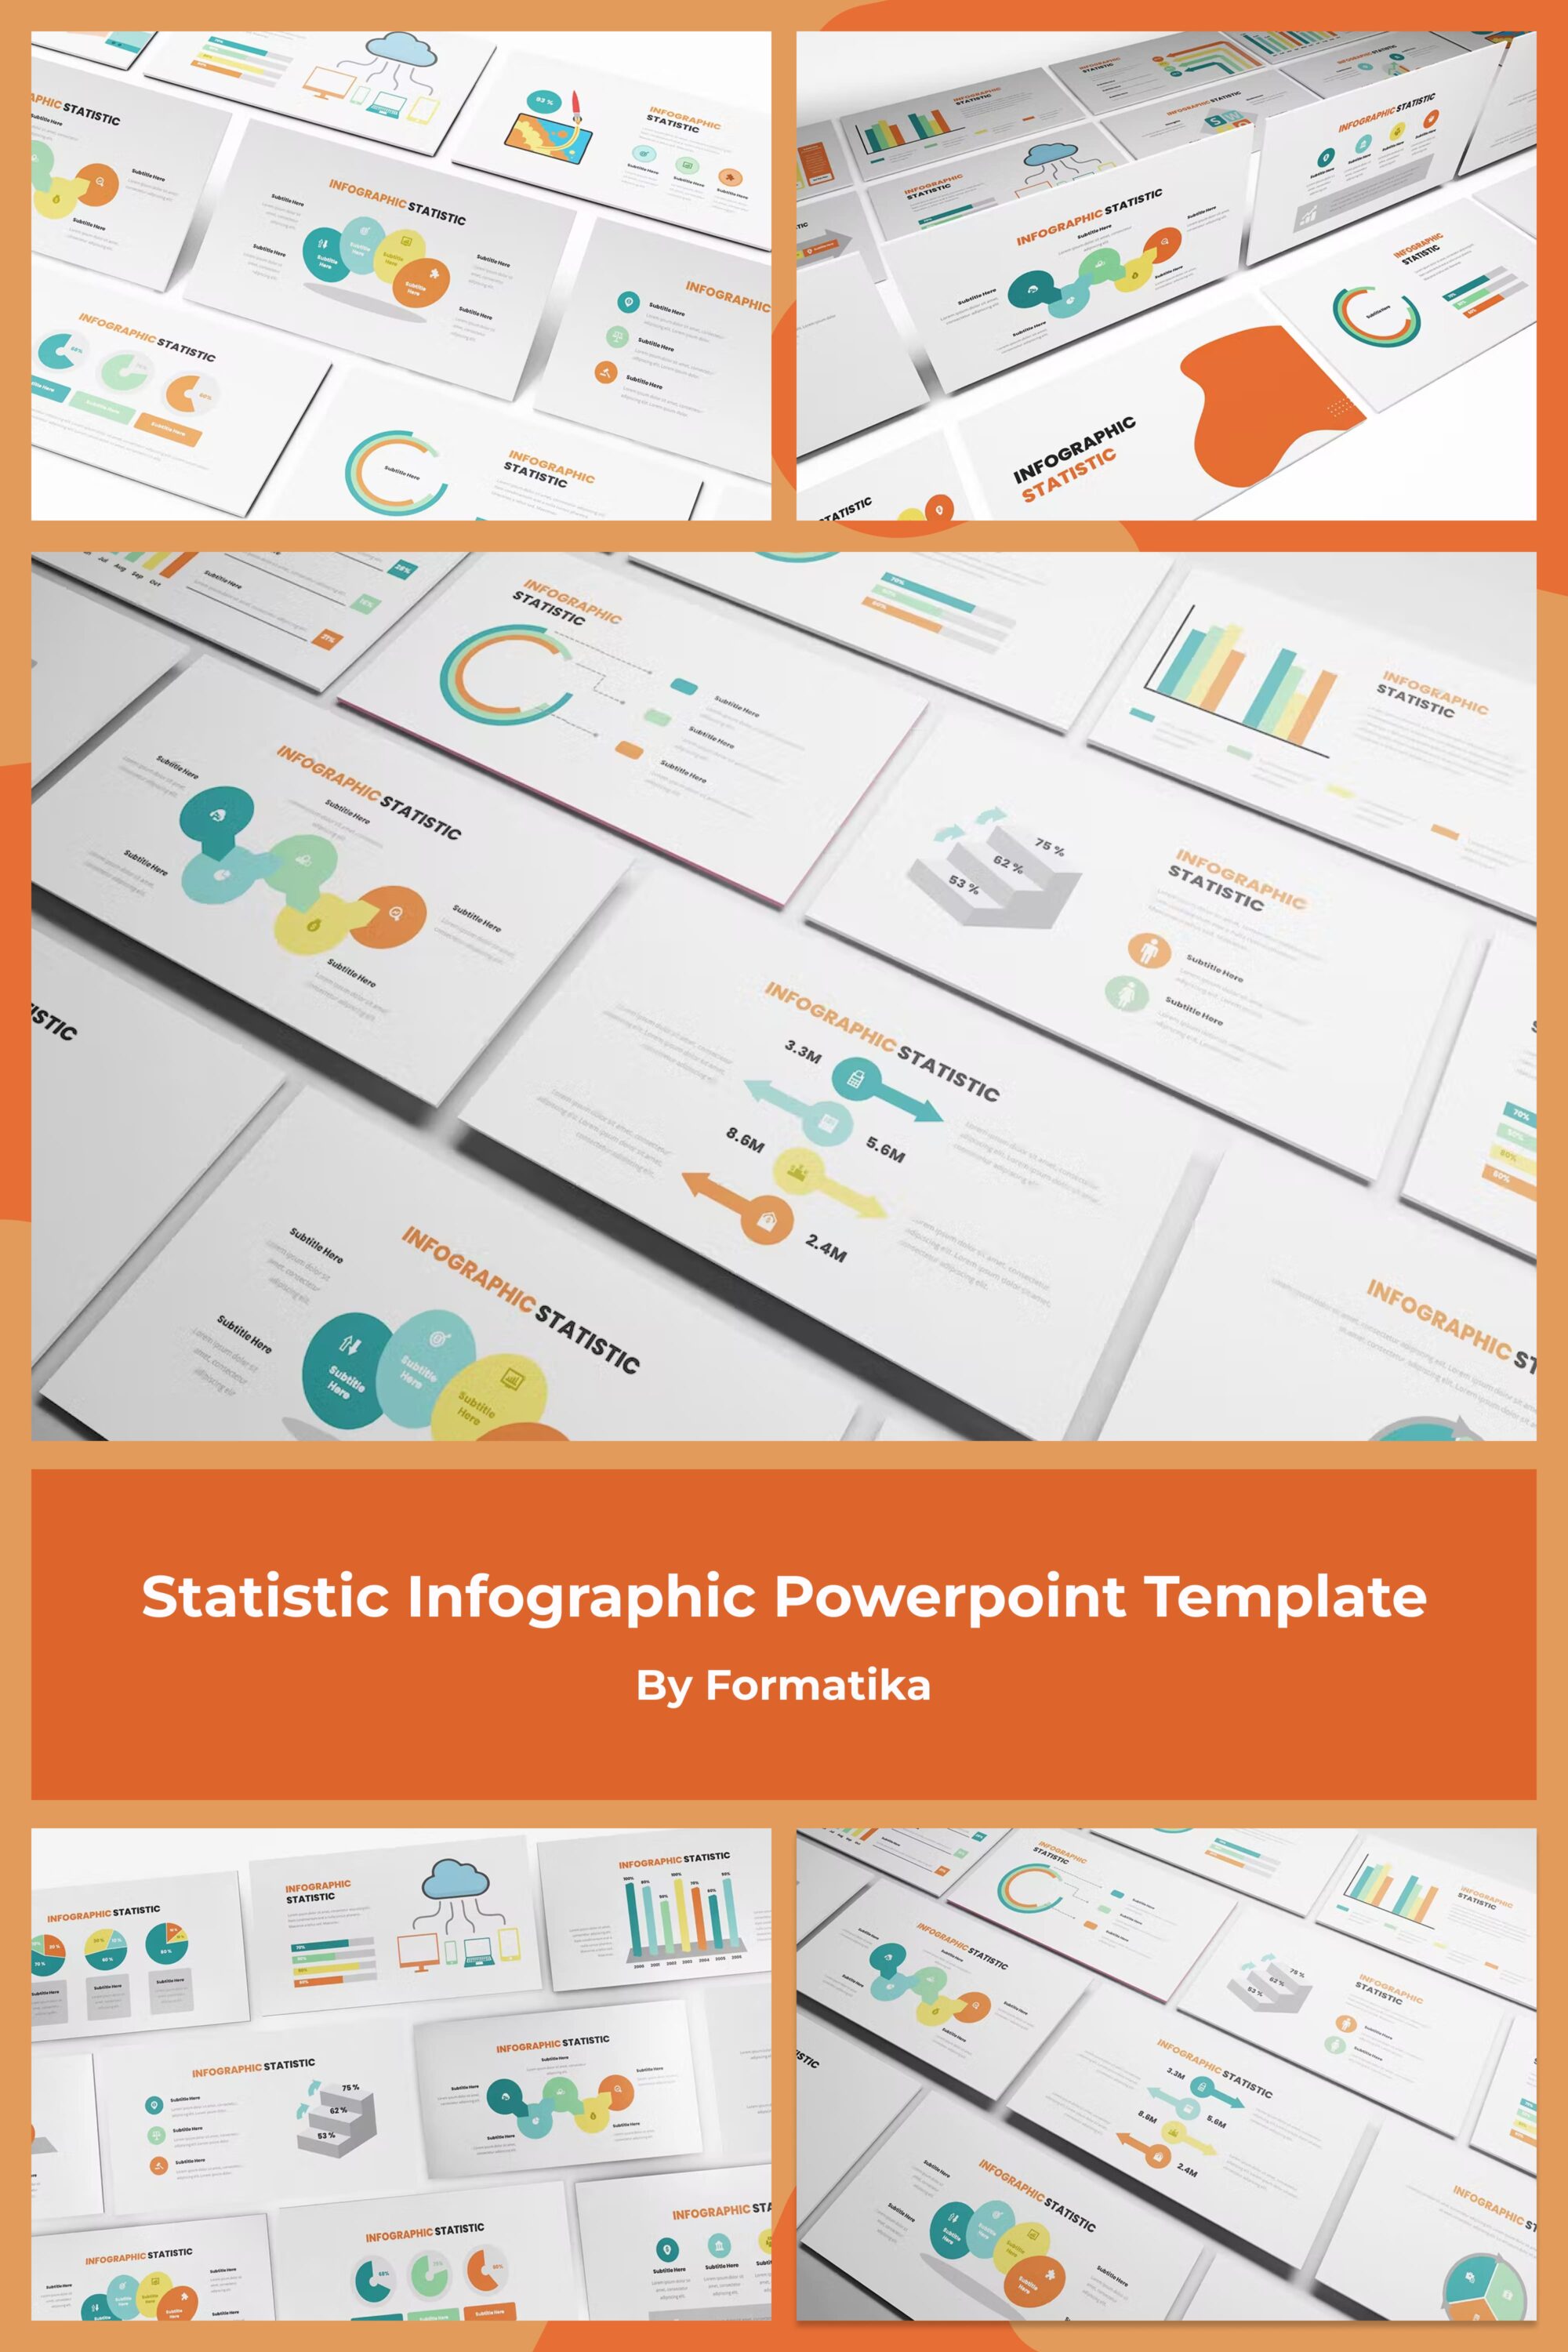 Statistic Infographic Powerpoint Template - pinterest image preview.